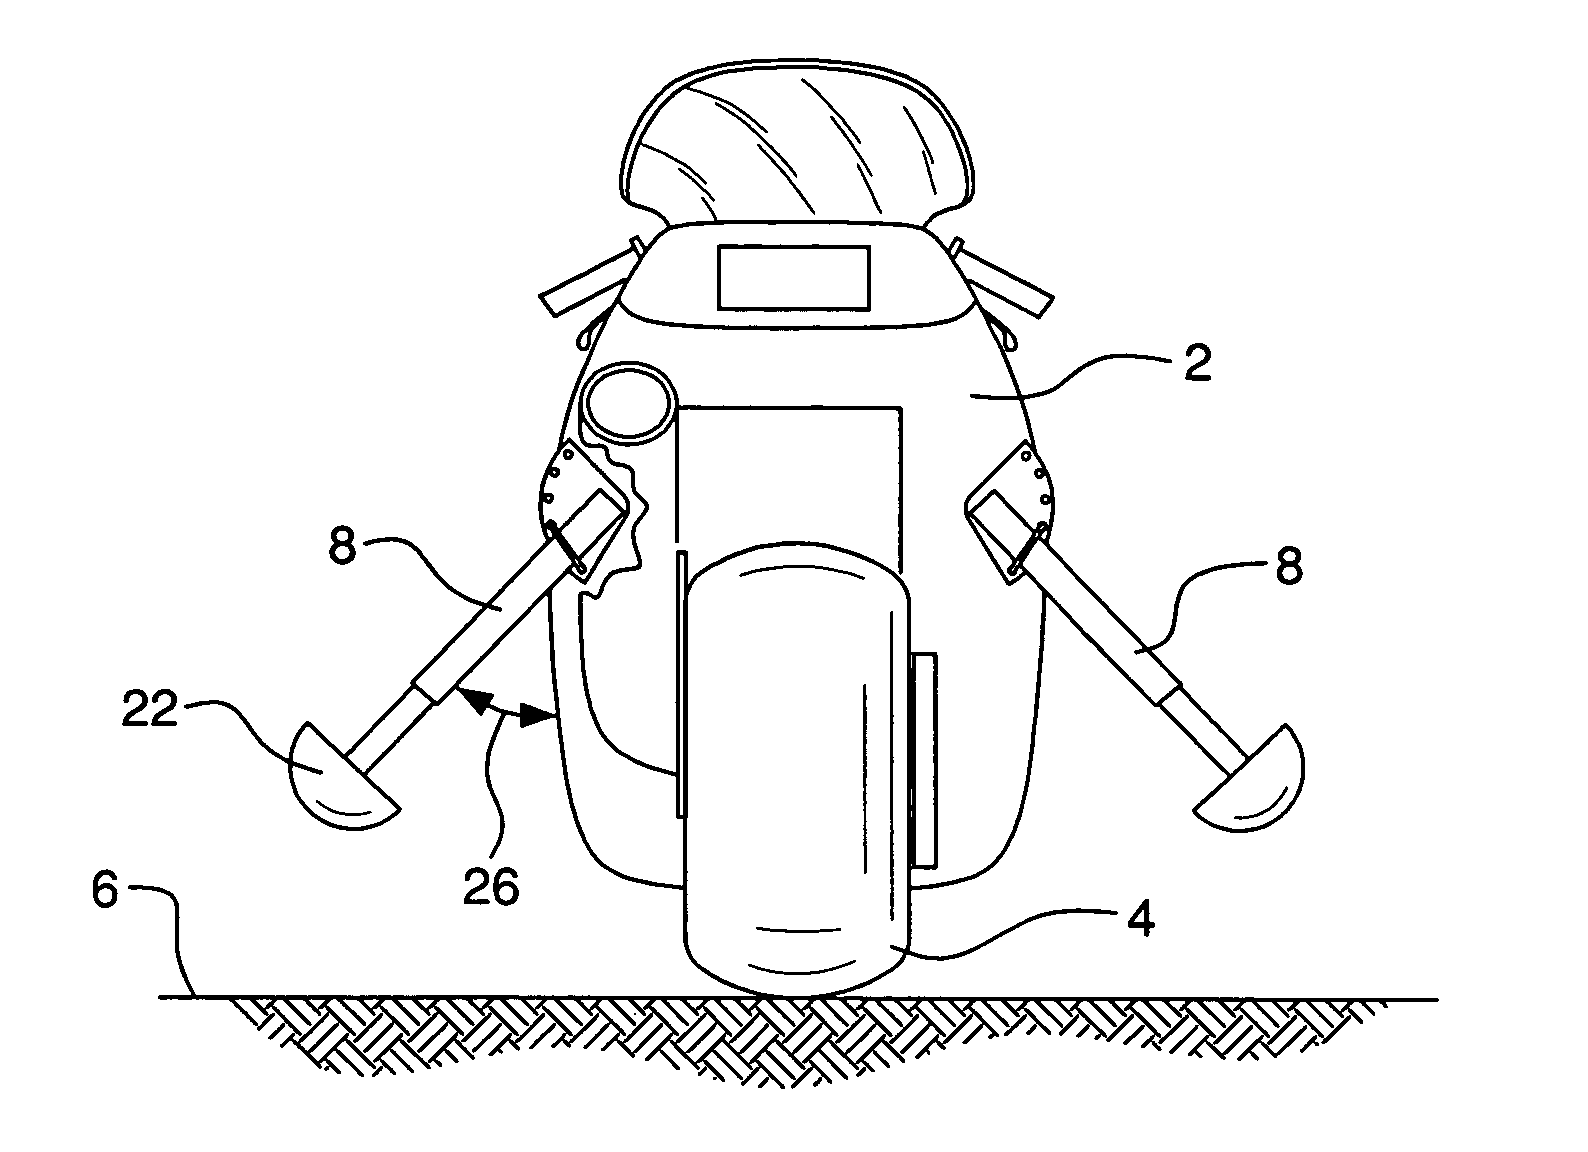 Apparatus and method for stabilizing a motorcycle during turning maneuvers